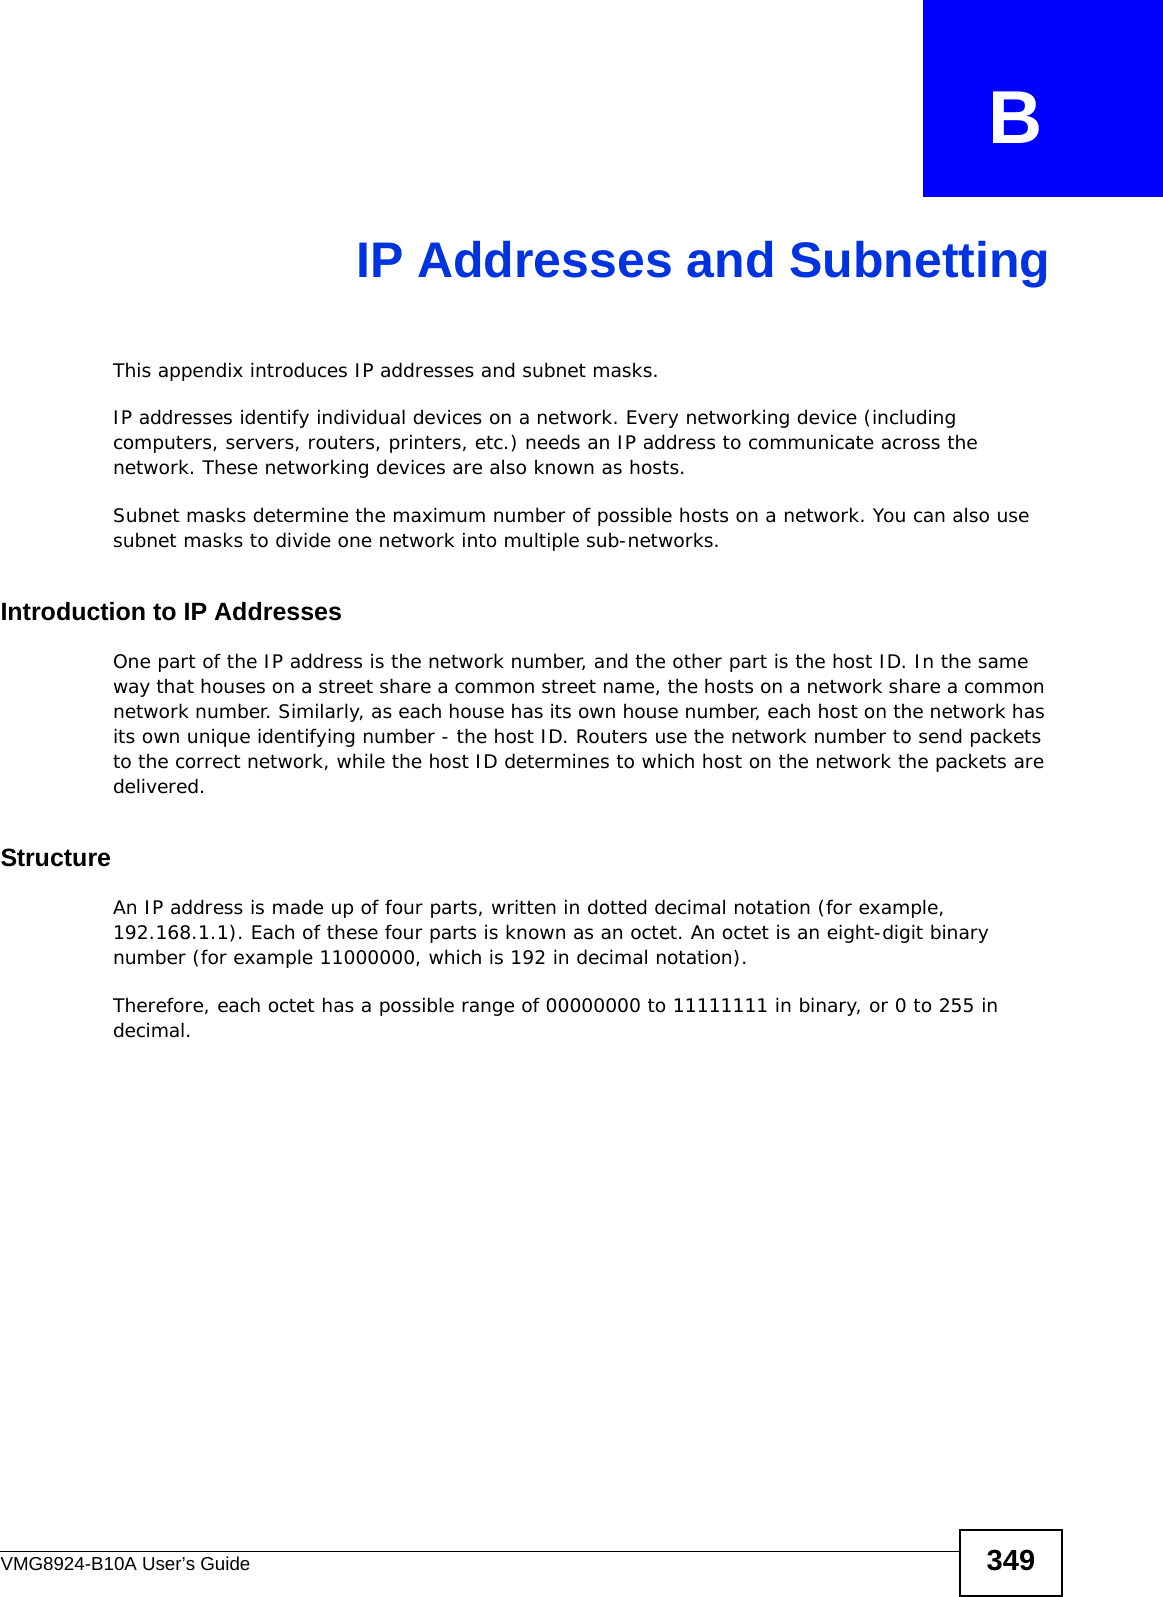 VMG8924-B10A User’s Guide 349APPENDIX   BIP Addresses and SubnettingThis appendix introduces IP addresses and subnet masks. IP addresses identify individual devices on a network. Every networking device (including computers, servers, routers, printers, etc.) needs an IP address to communicate across the network. These networking devices are also known as hosts.Subnet masks determine the maximum number of possible hosts on a network. You can also use subnet masks to divide one network into multiple sub-networks.Introduction to IP AddressesOne part of the IP address is the network number, and the other part is the host ID. In the same way that houses on a street share a common street name, the hosts on a network share a common network number. Similarly, as each house has its own house number, each host on the network has its own unique identifying number - the host ID. Routers use the network number to send packets to the correct network, while the host ID determines to which host on the network the packets are delivered.StructureAn IP address is made up of four parts, written in dotted decimal notation (for example, 192.168.1.1). Each of these four parts is known as an octet. An octet is an eight-digit binary number (for example 11000000, which is 192 in decimal notation). Therefore, each octet has a possible range of 00000000 to 11111111 in binary, or 0 to 255 in decimal.